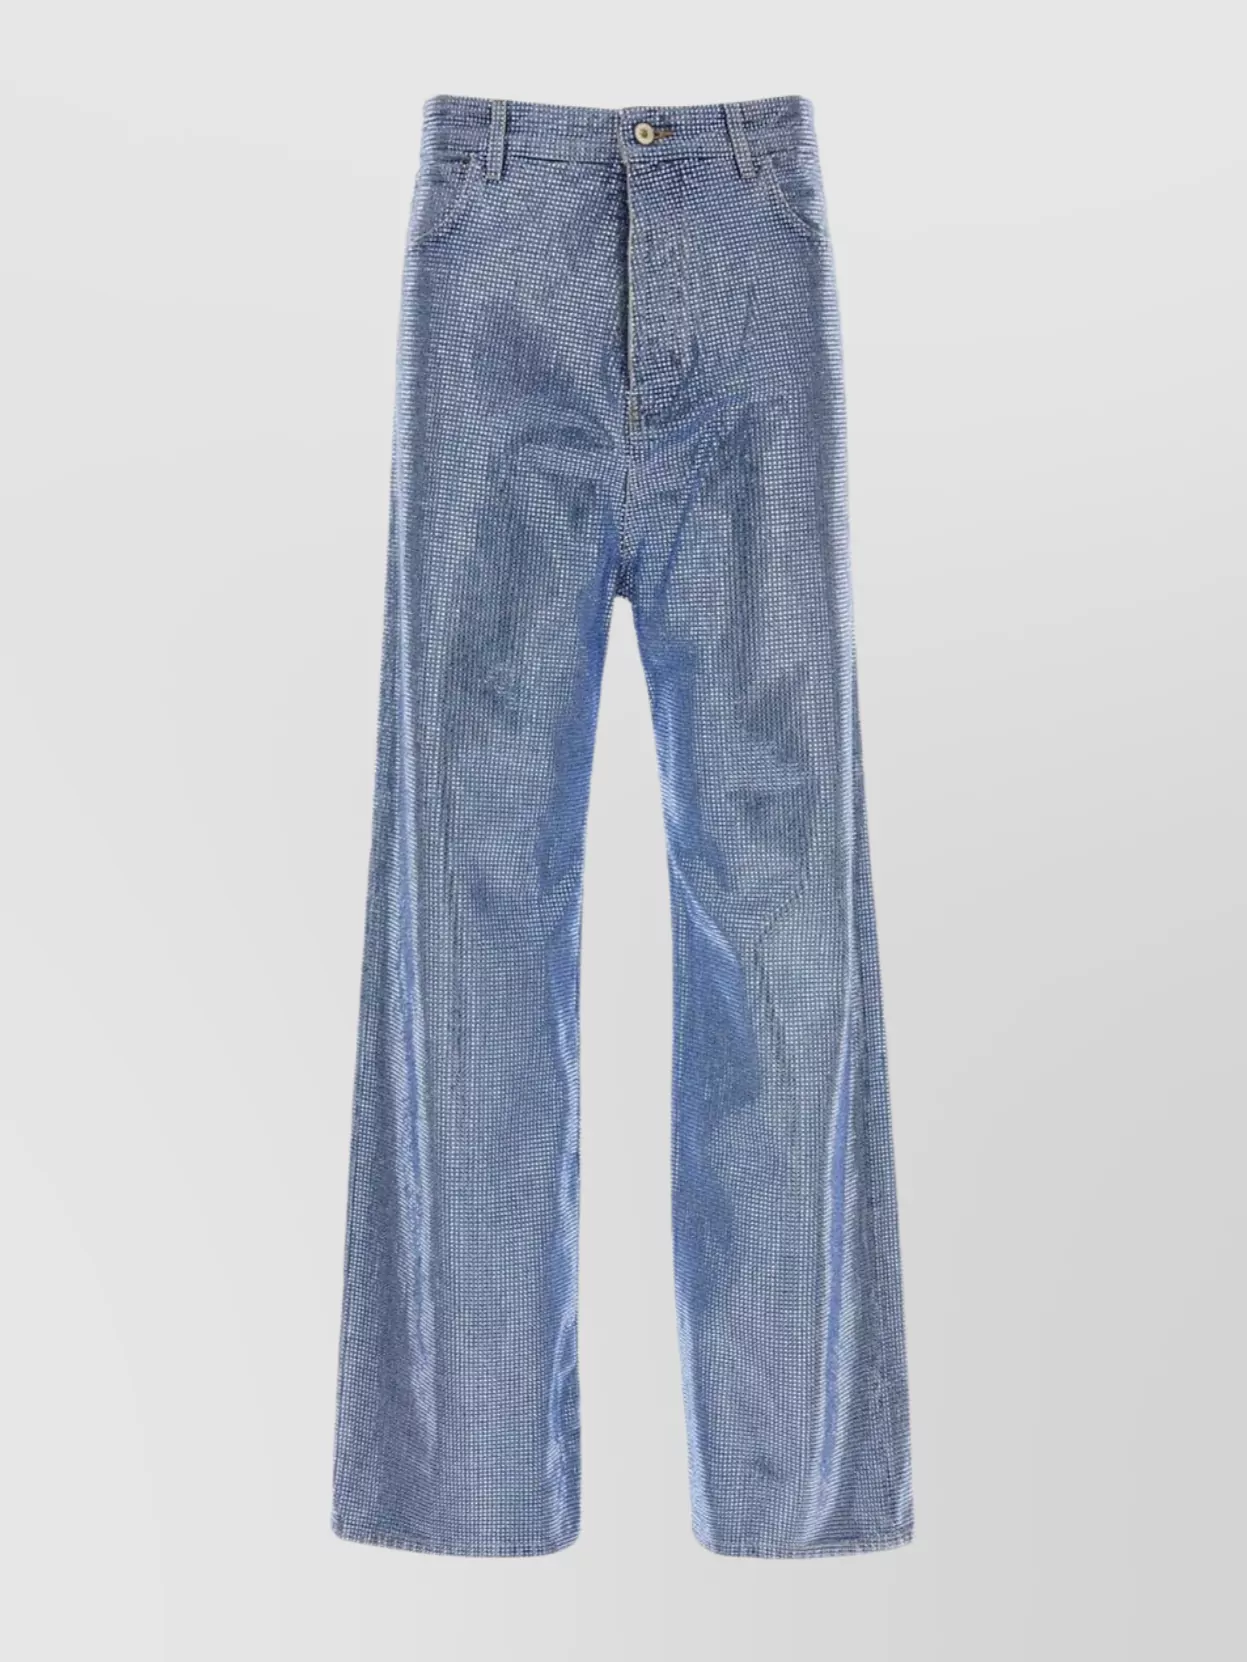 Shop Loewe Denim Jeans With Back Pockets And Wide Leg Cut